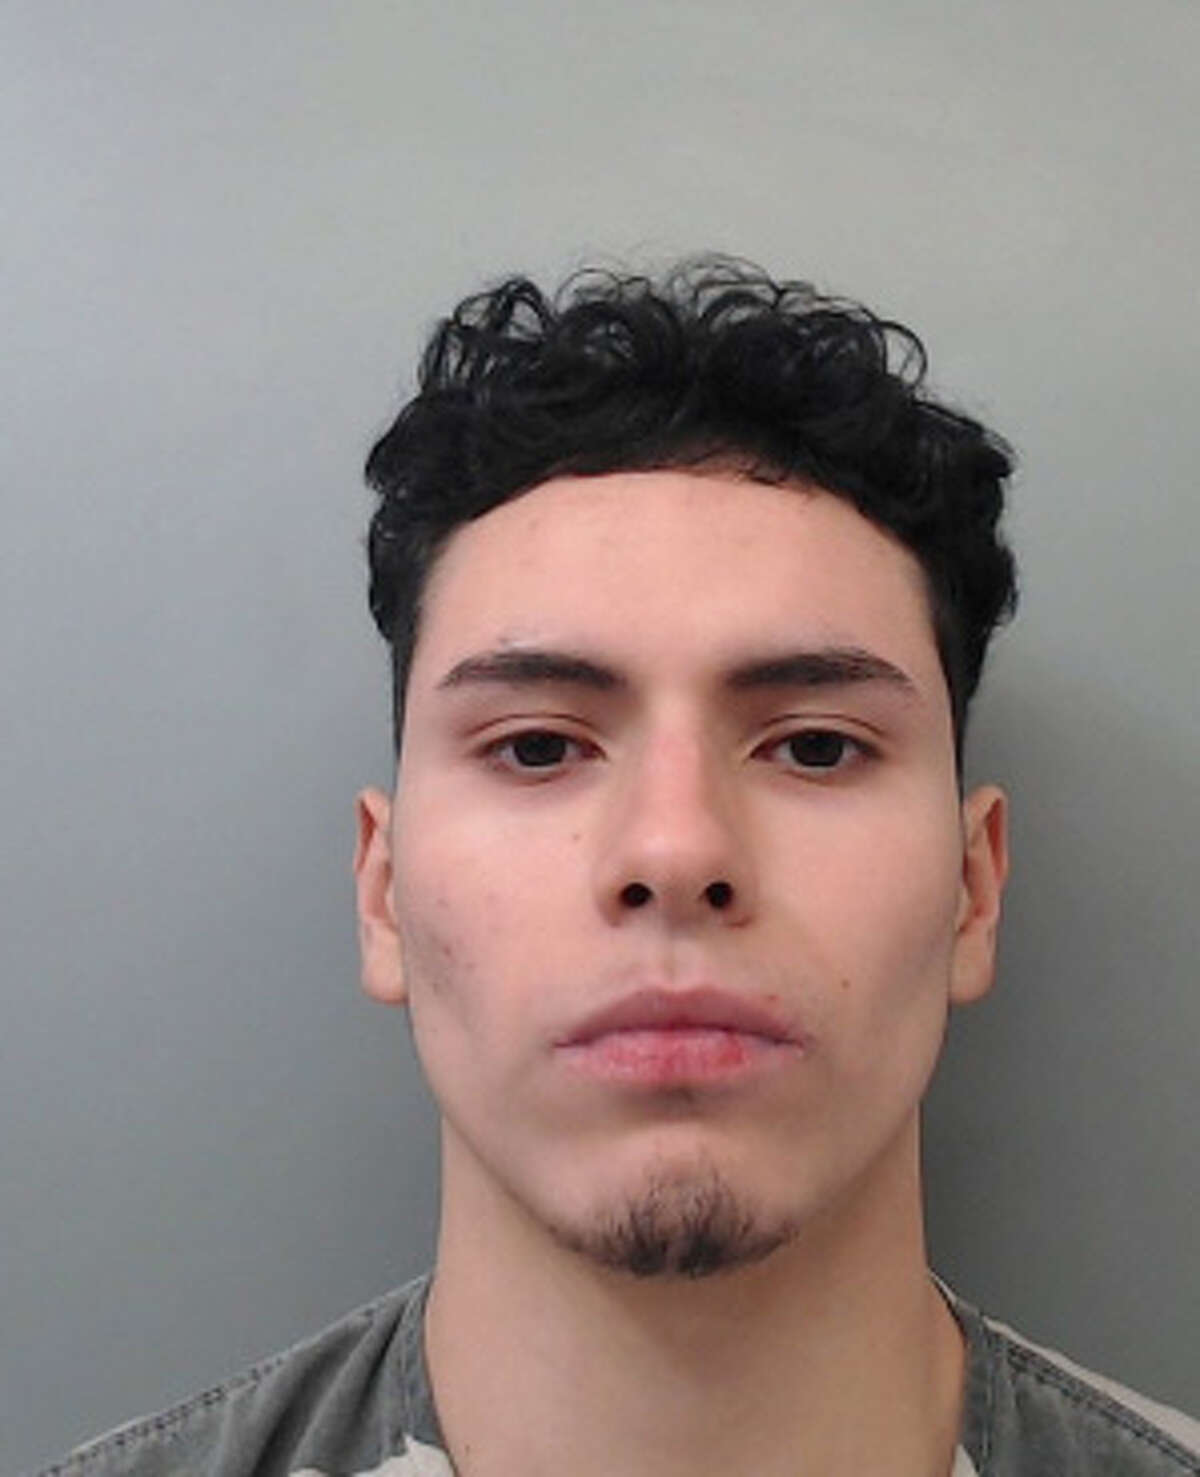 Albert Pescador, 17, was charged with burglary.